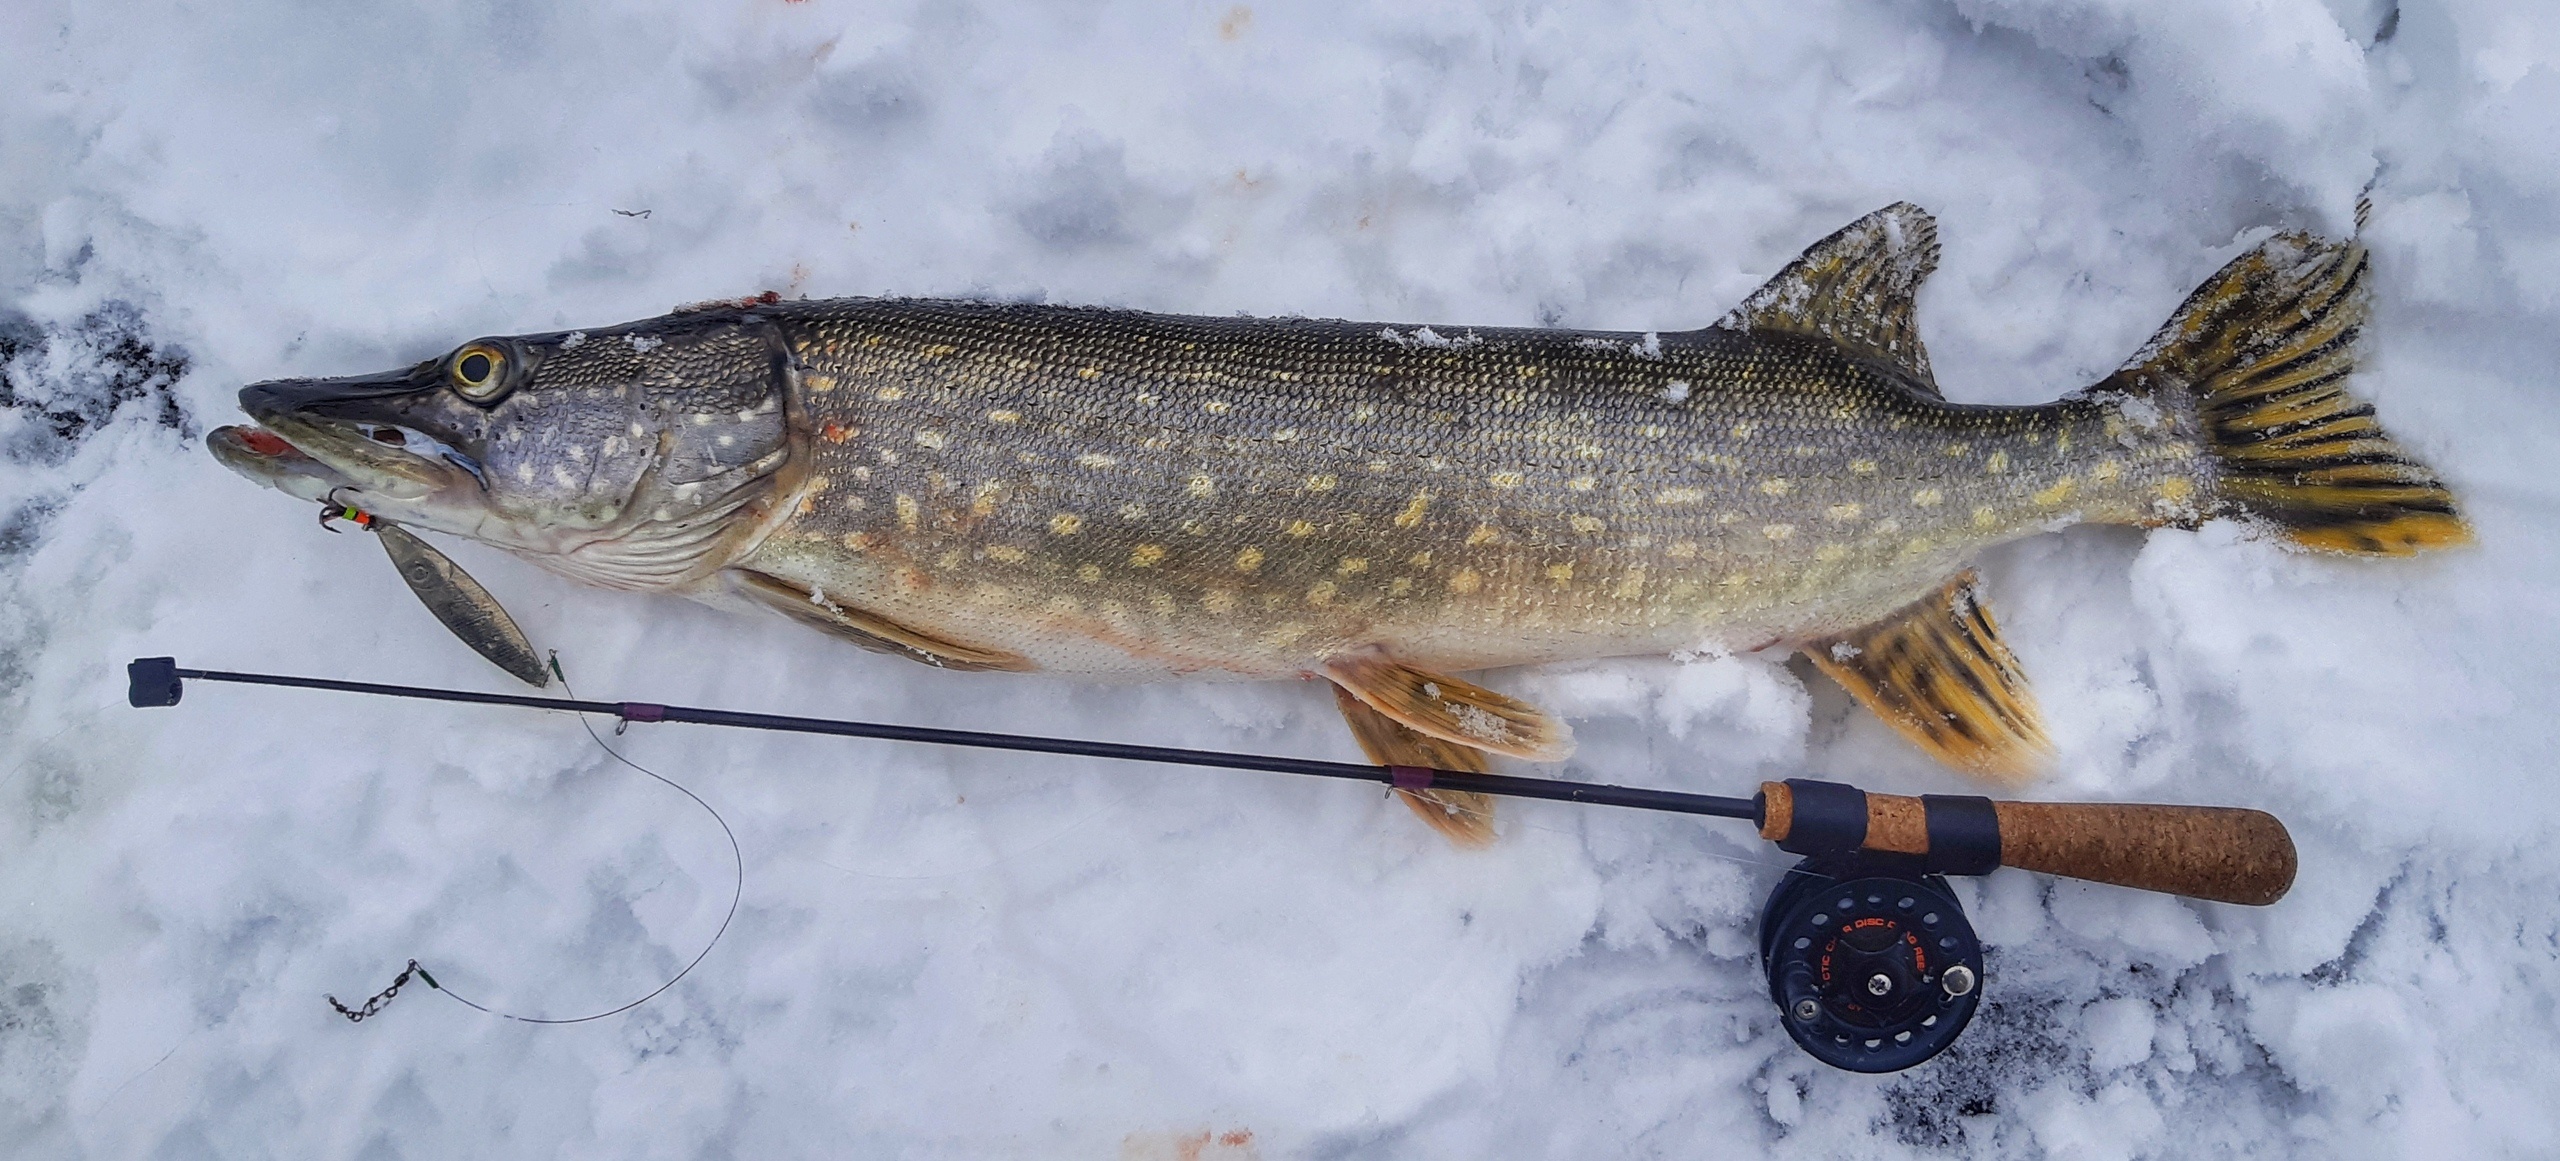 Pike fishing in winter from the ice: fishing in December, January, February